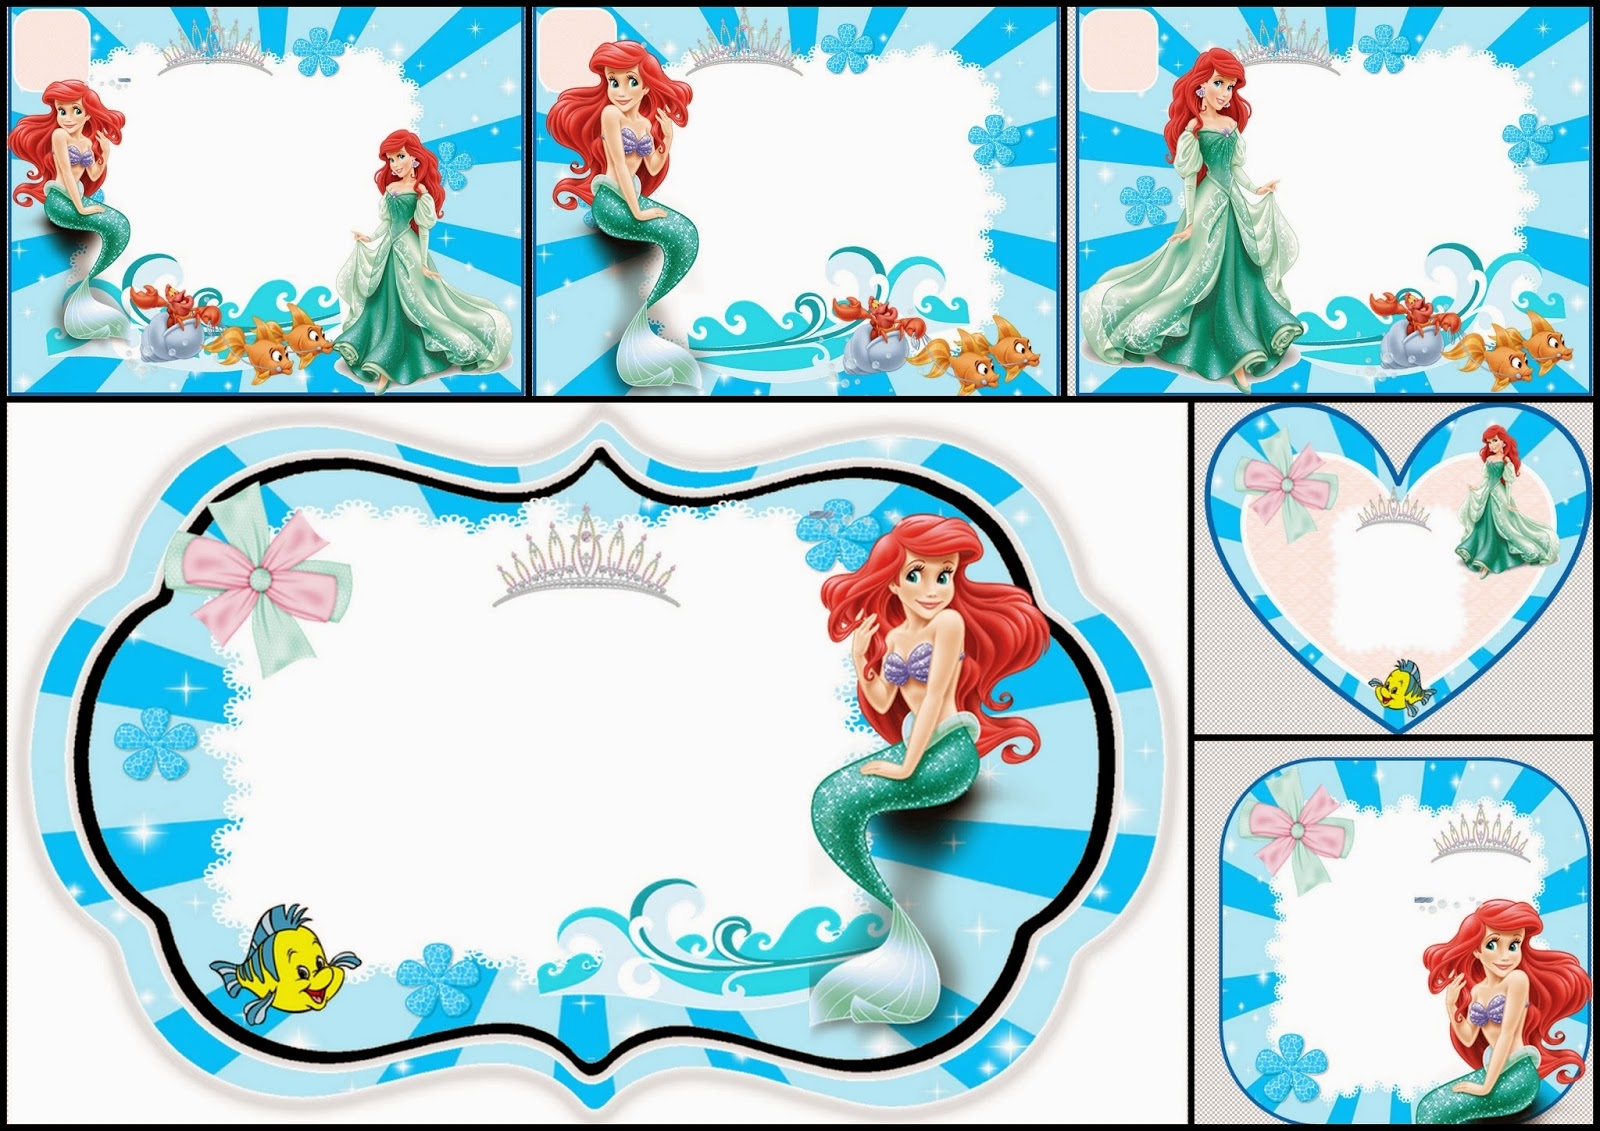 The Little Mermaid Free Printable Invitations Cards Or Photo Frames Oh My Fiesta In English - Free Little Mermaid Printable Invitations